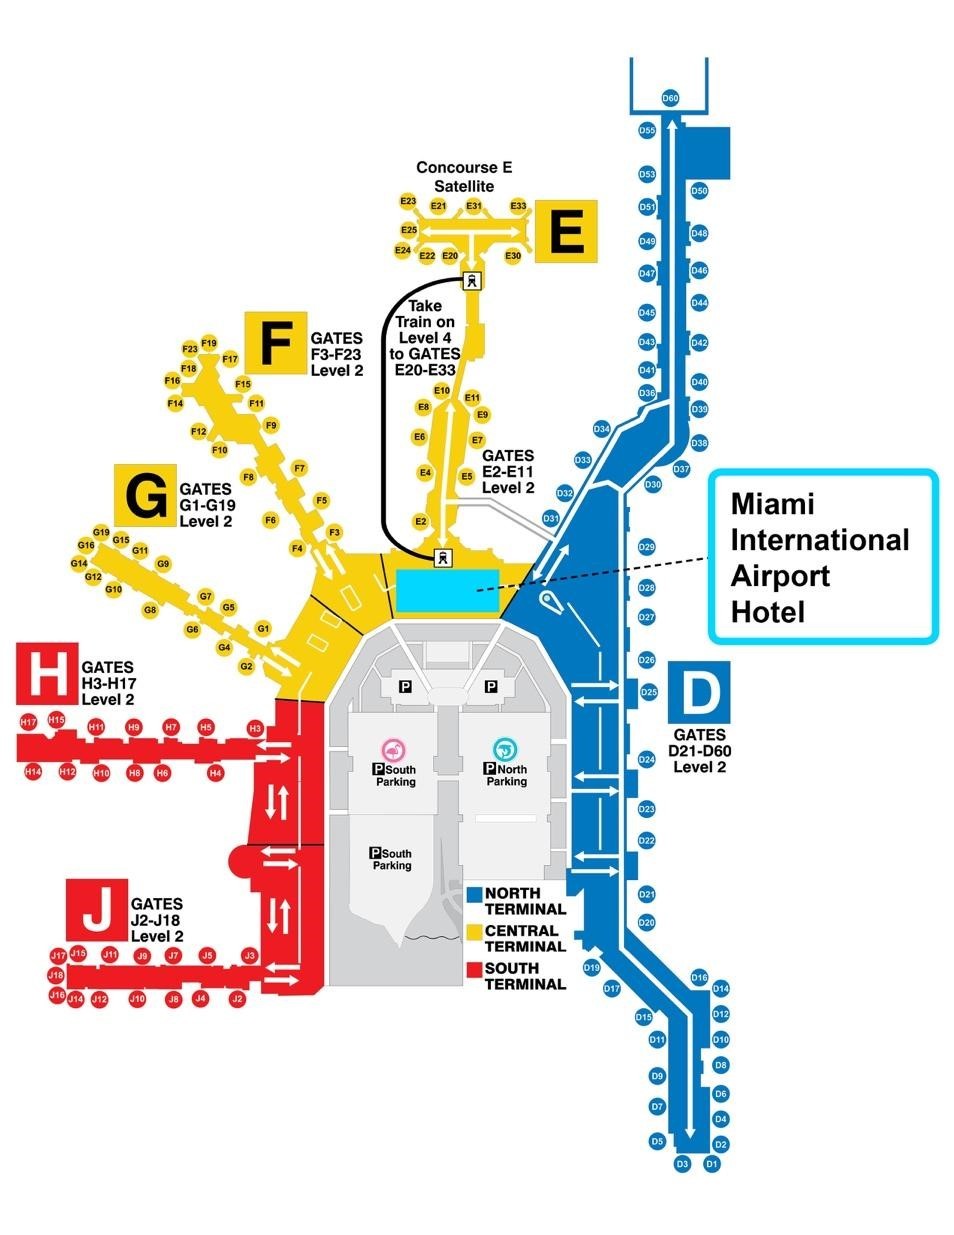 map of miami international airport Mcr Is Now Managing The Miami International Airport Hotel map of miami international airport